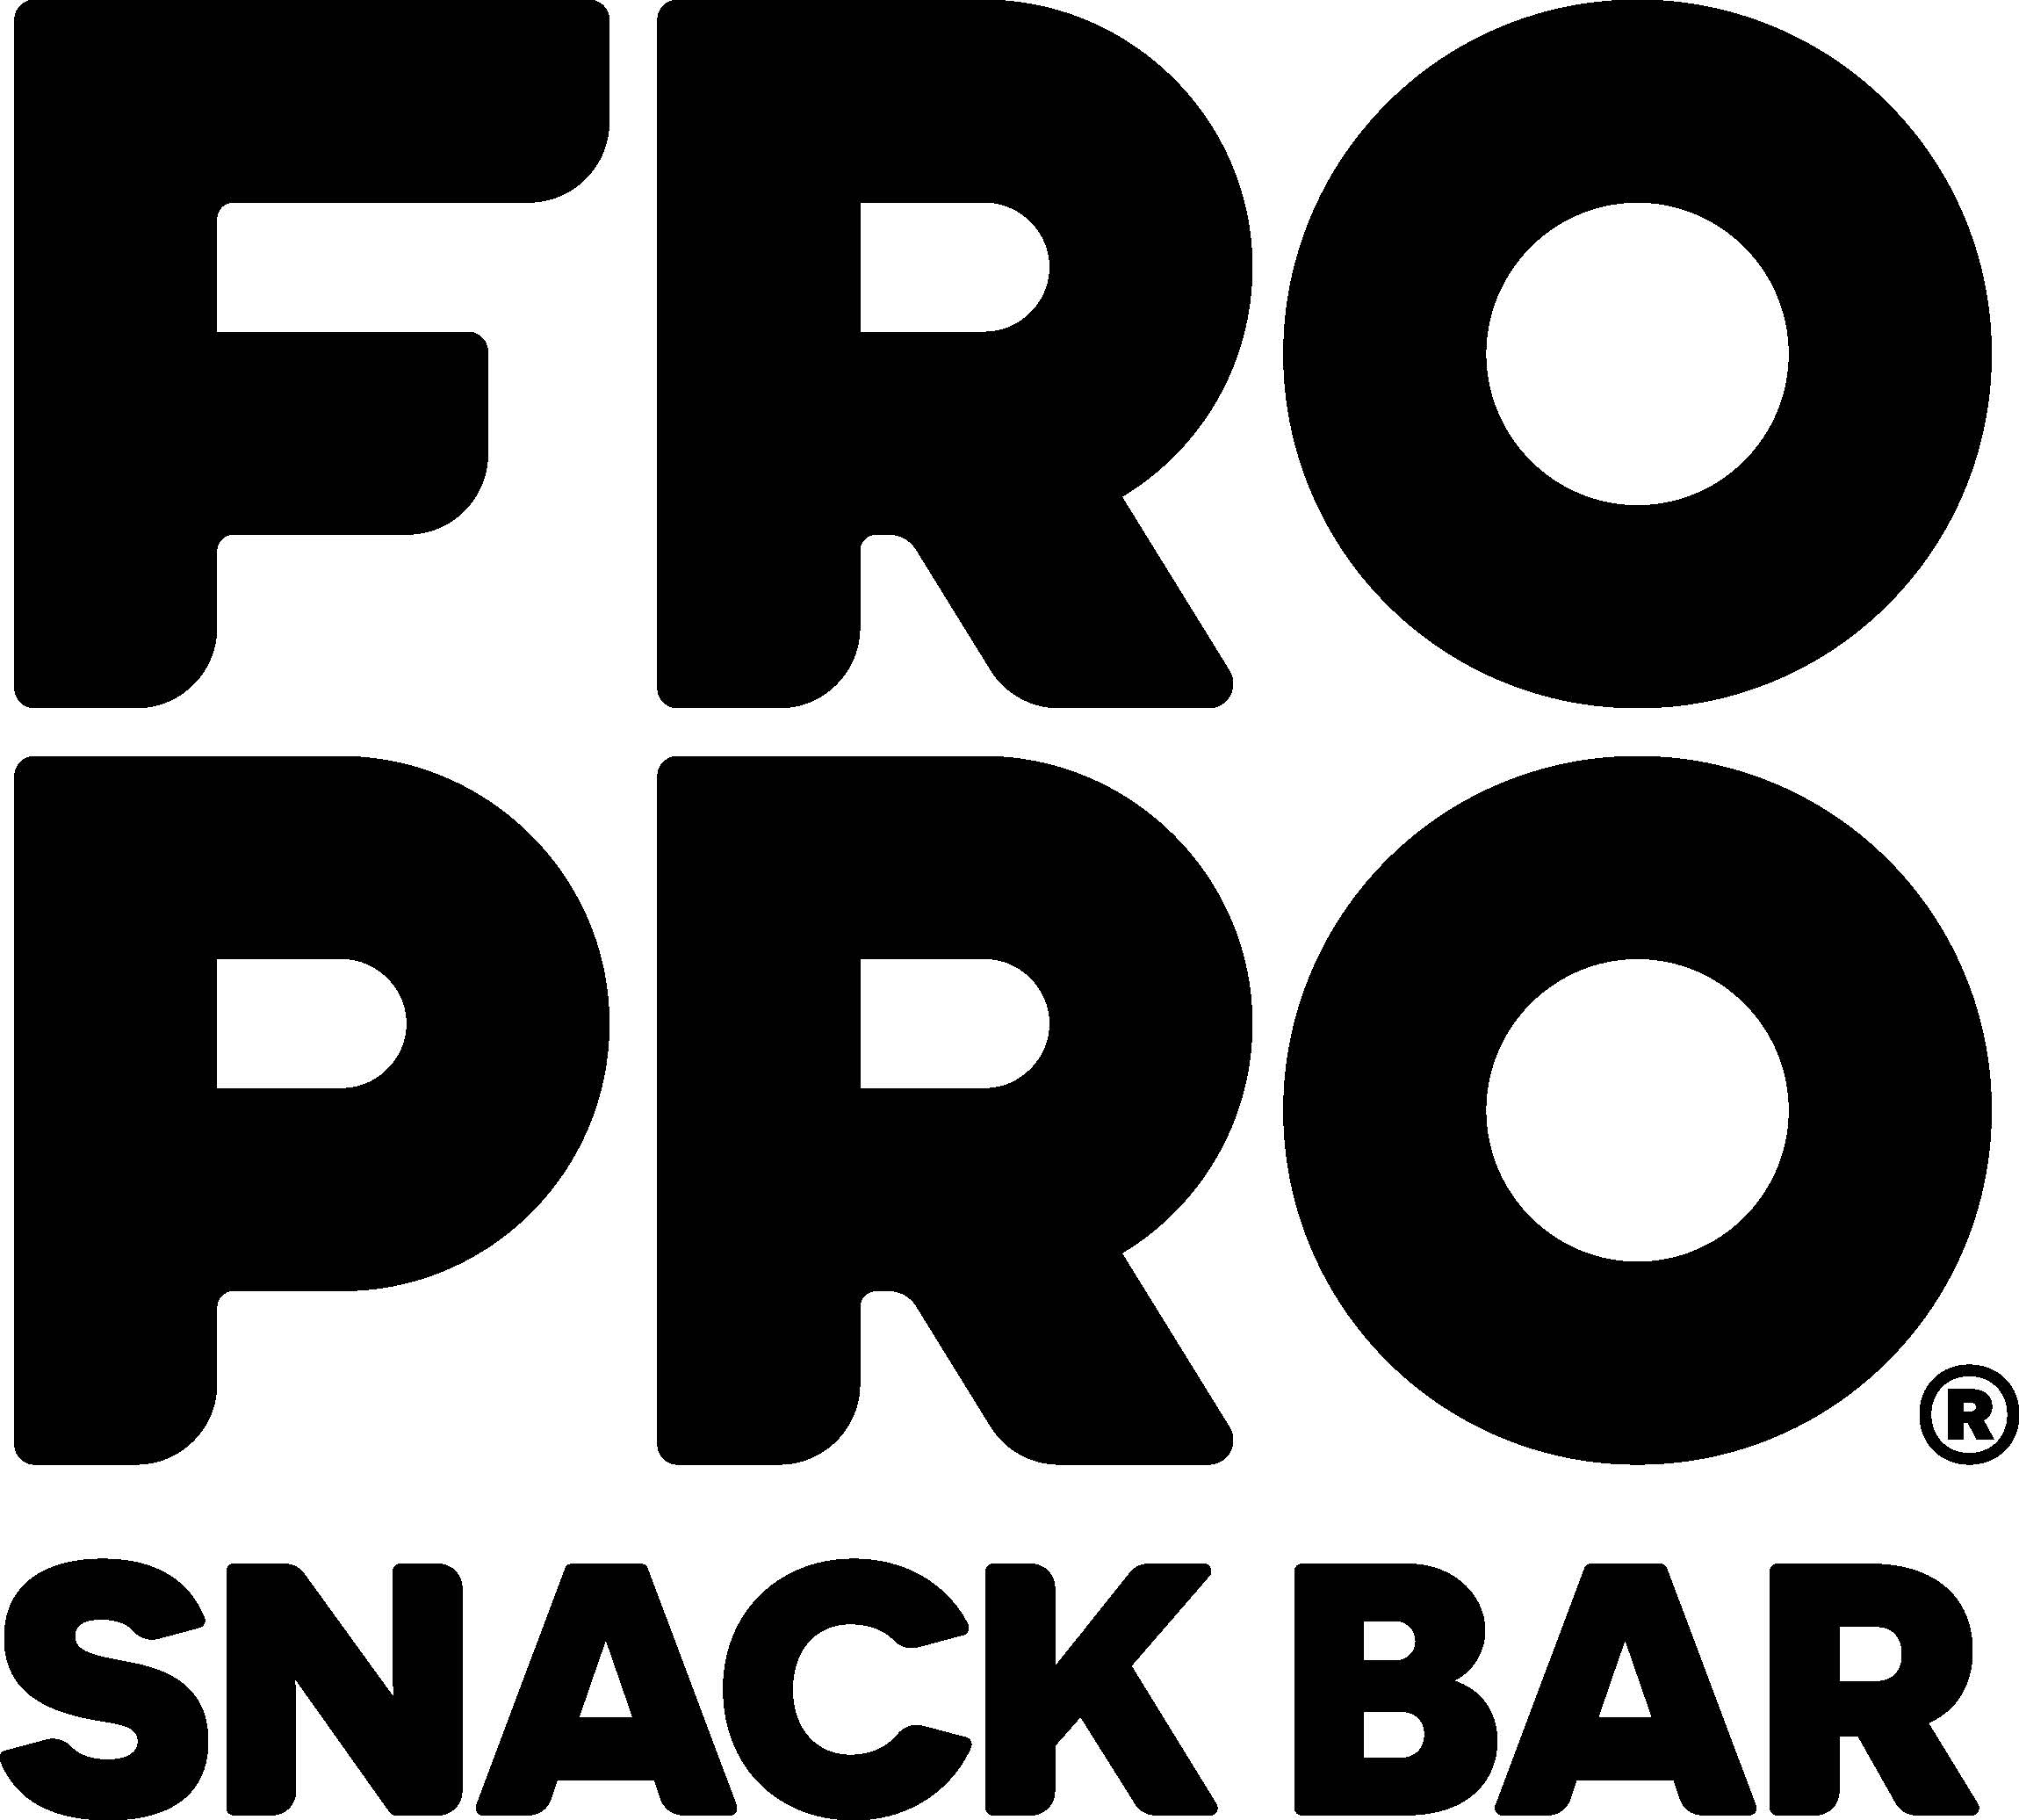 FROPRO SNACK BAR